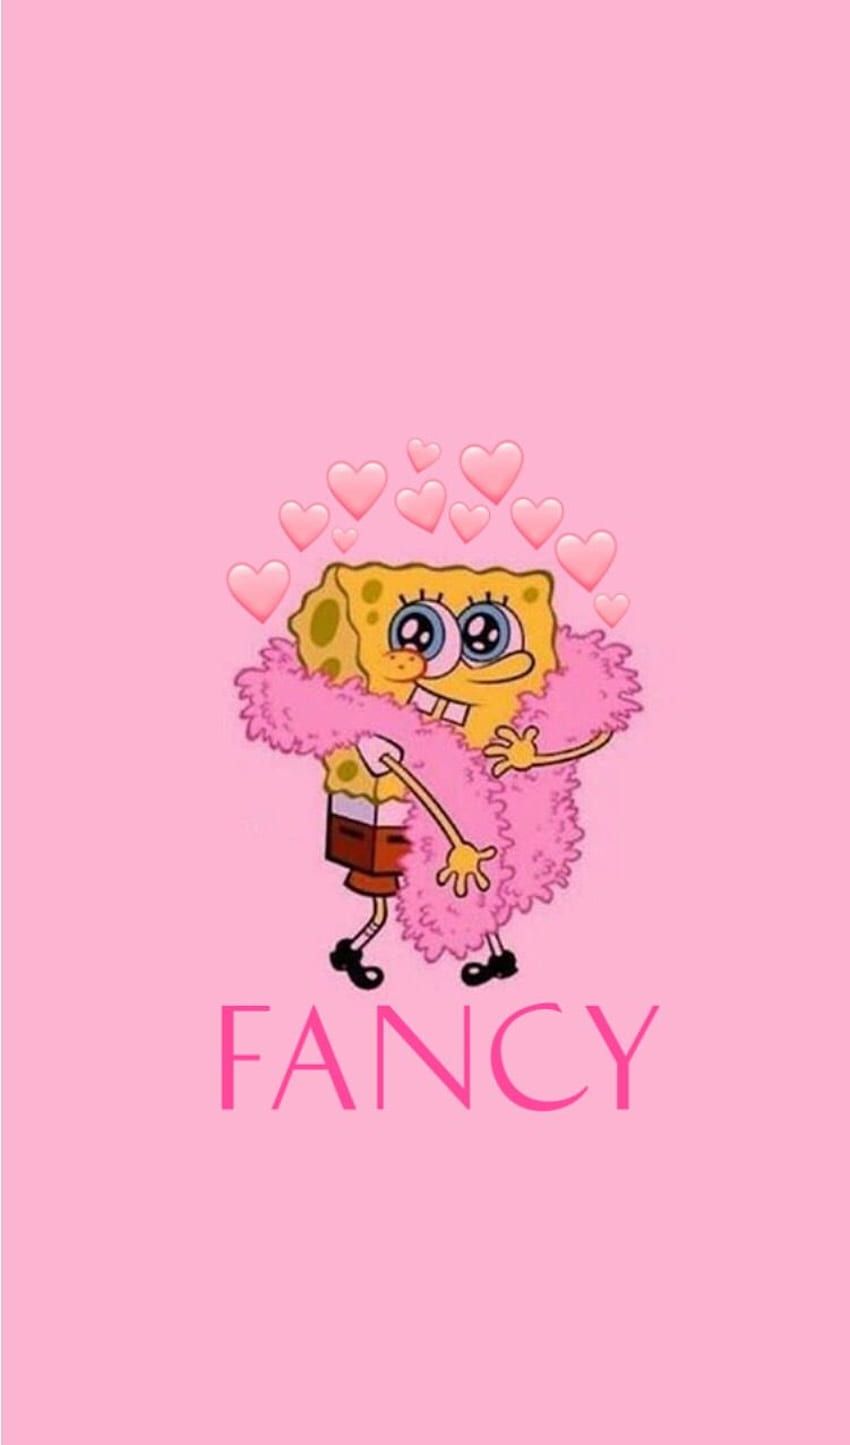 Spongebob squarepants, dressed in pink, with hearts around him, pink background, wallpaper for girls, fancy written in pink - Profile picture